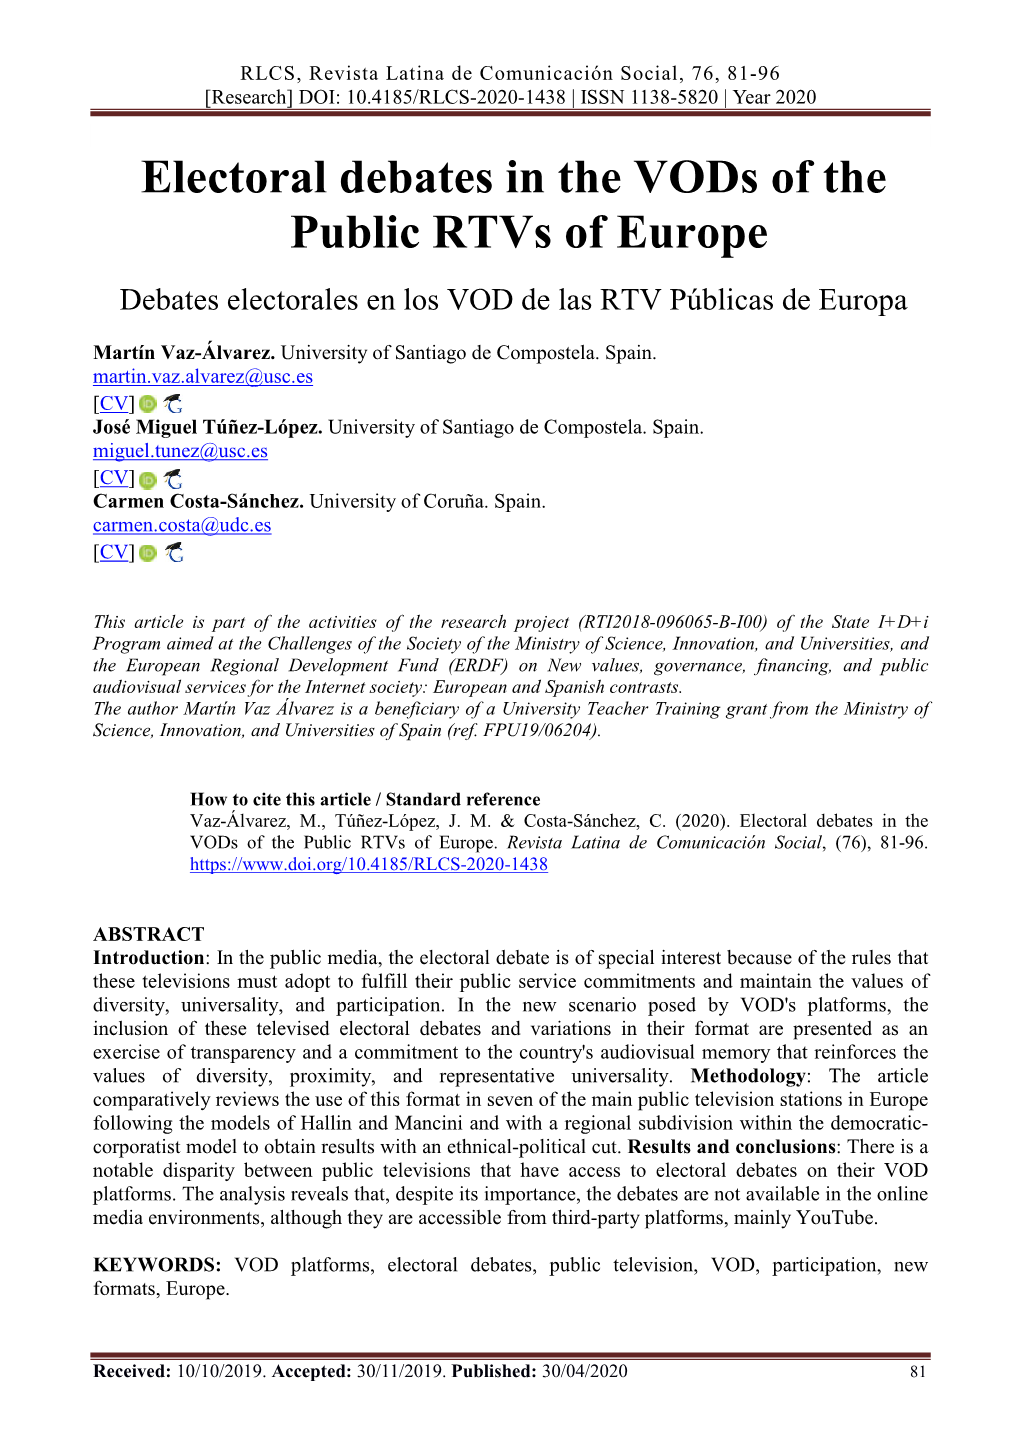 Electoral Debates in the Vods of the Public Rtvs of Europe